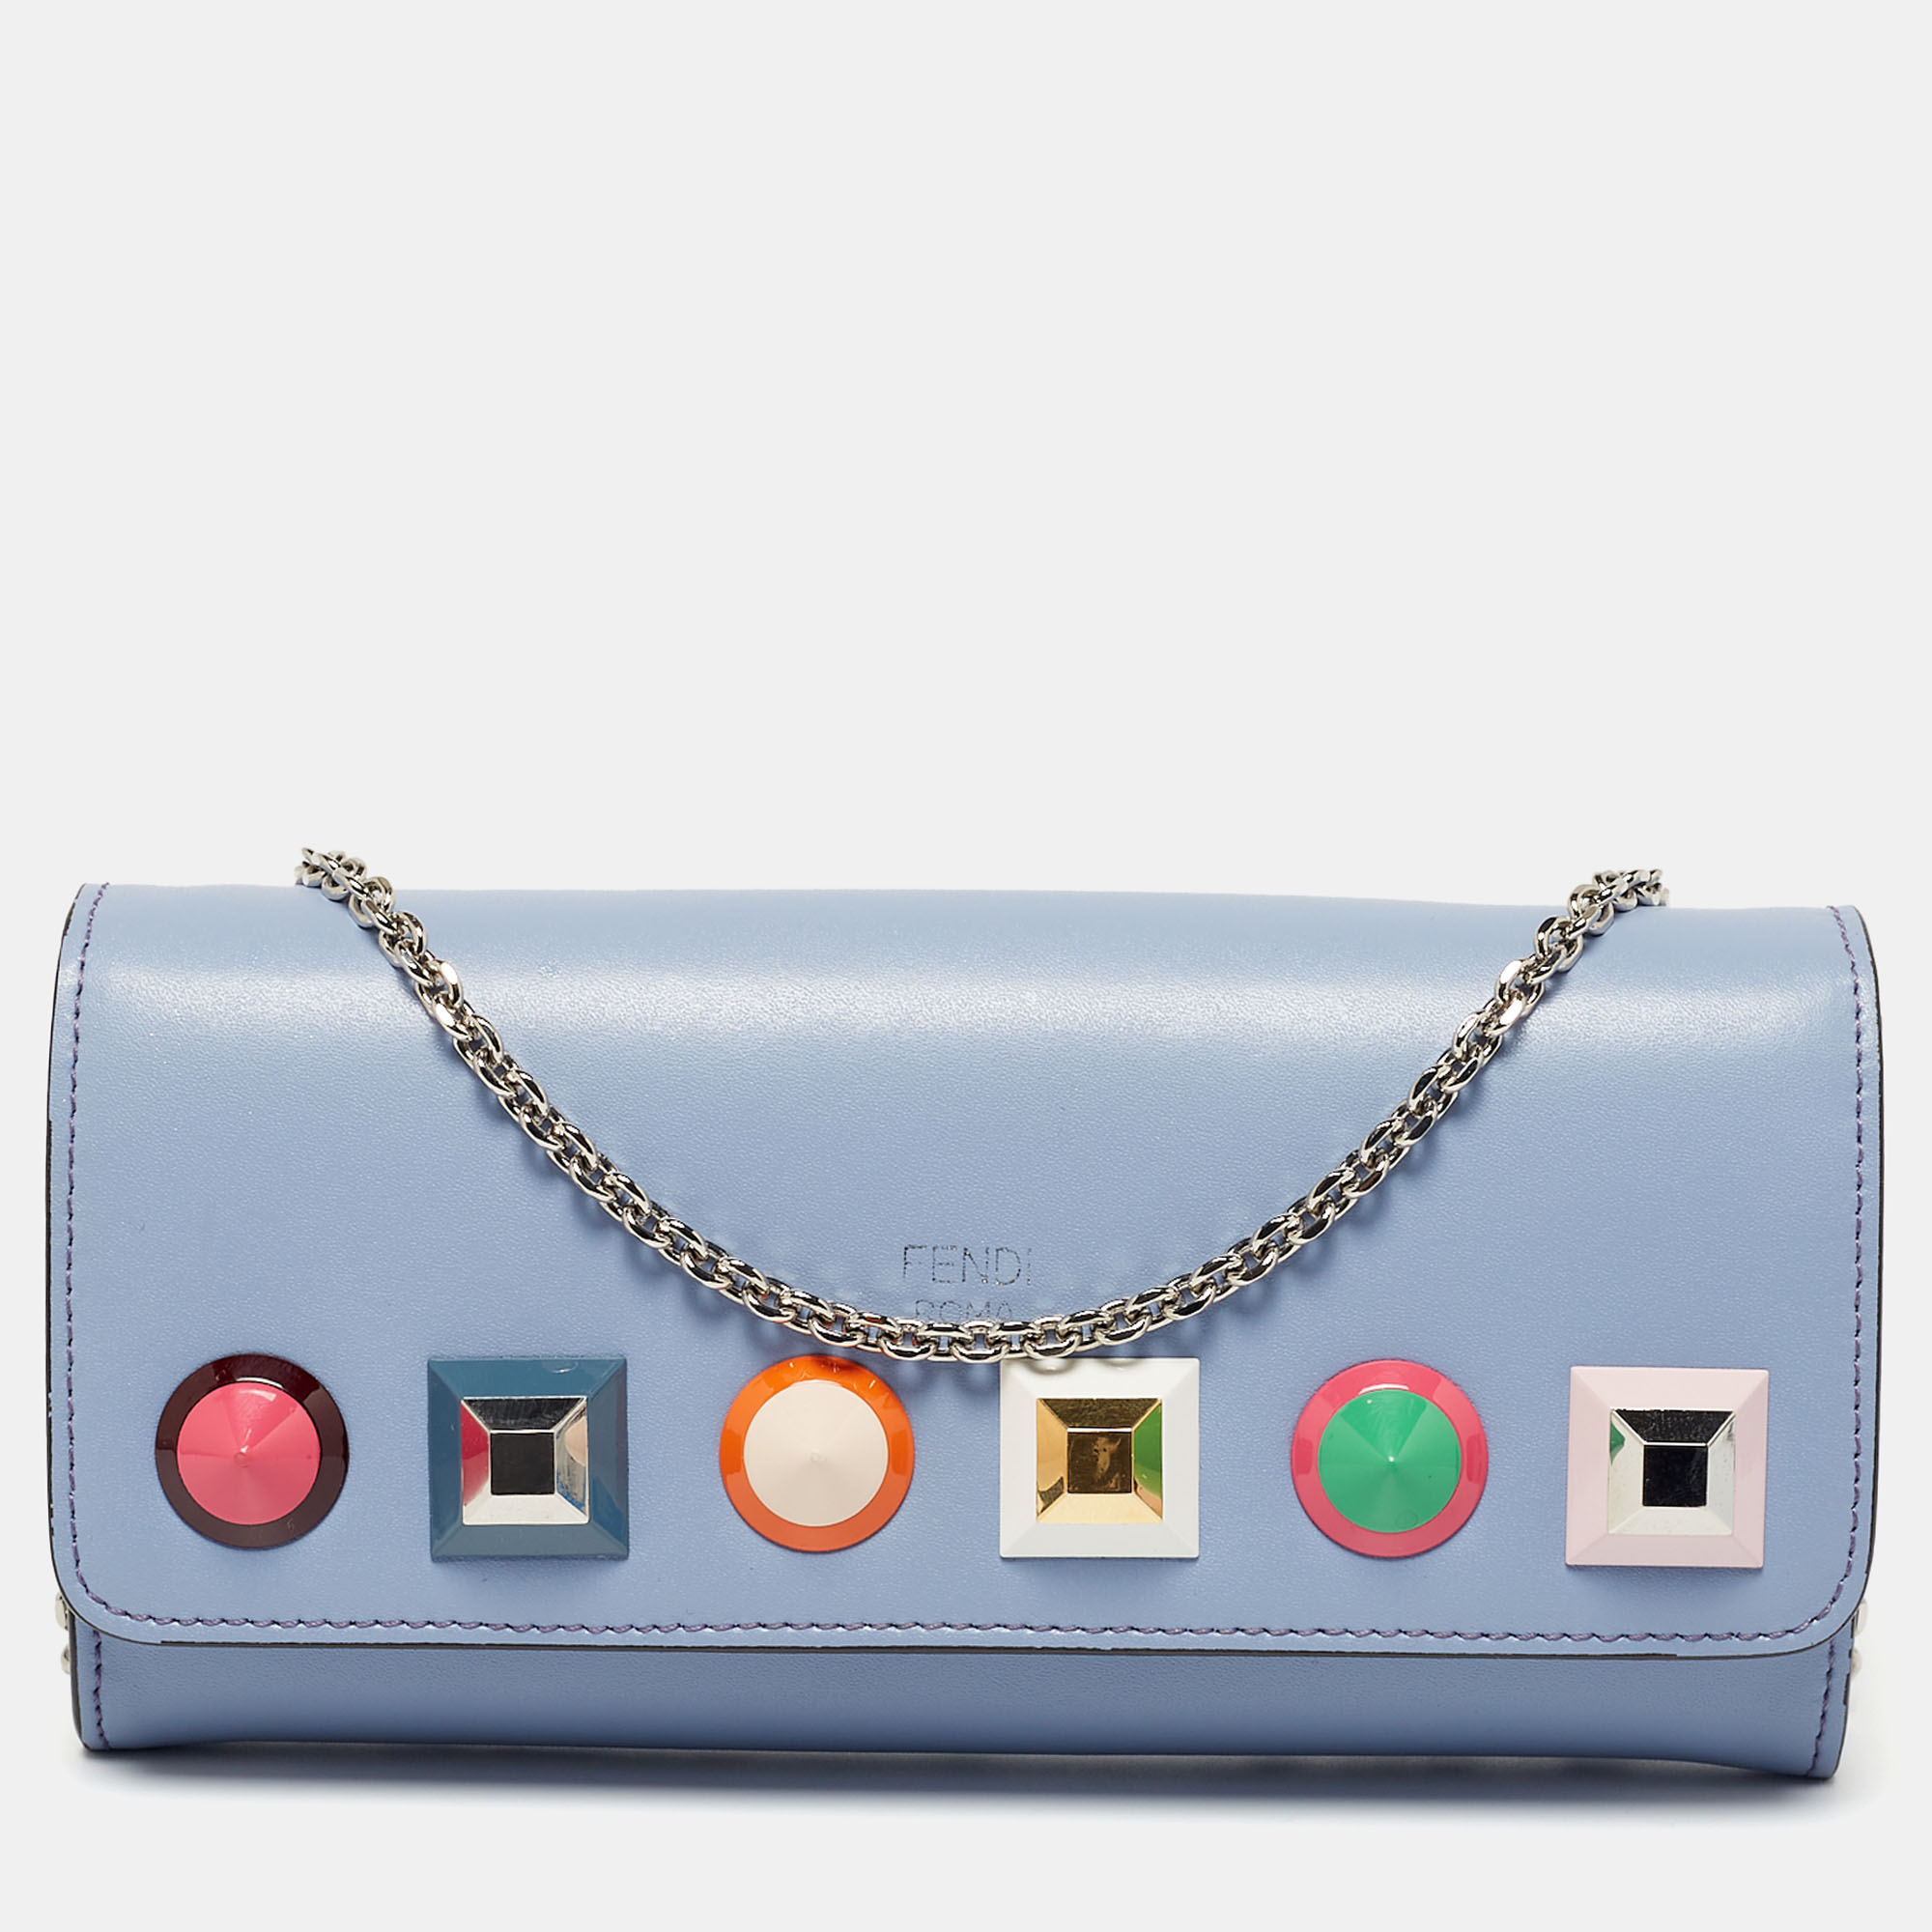 Fendi Continental Wallet on Chain Studded Leather Blue